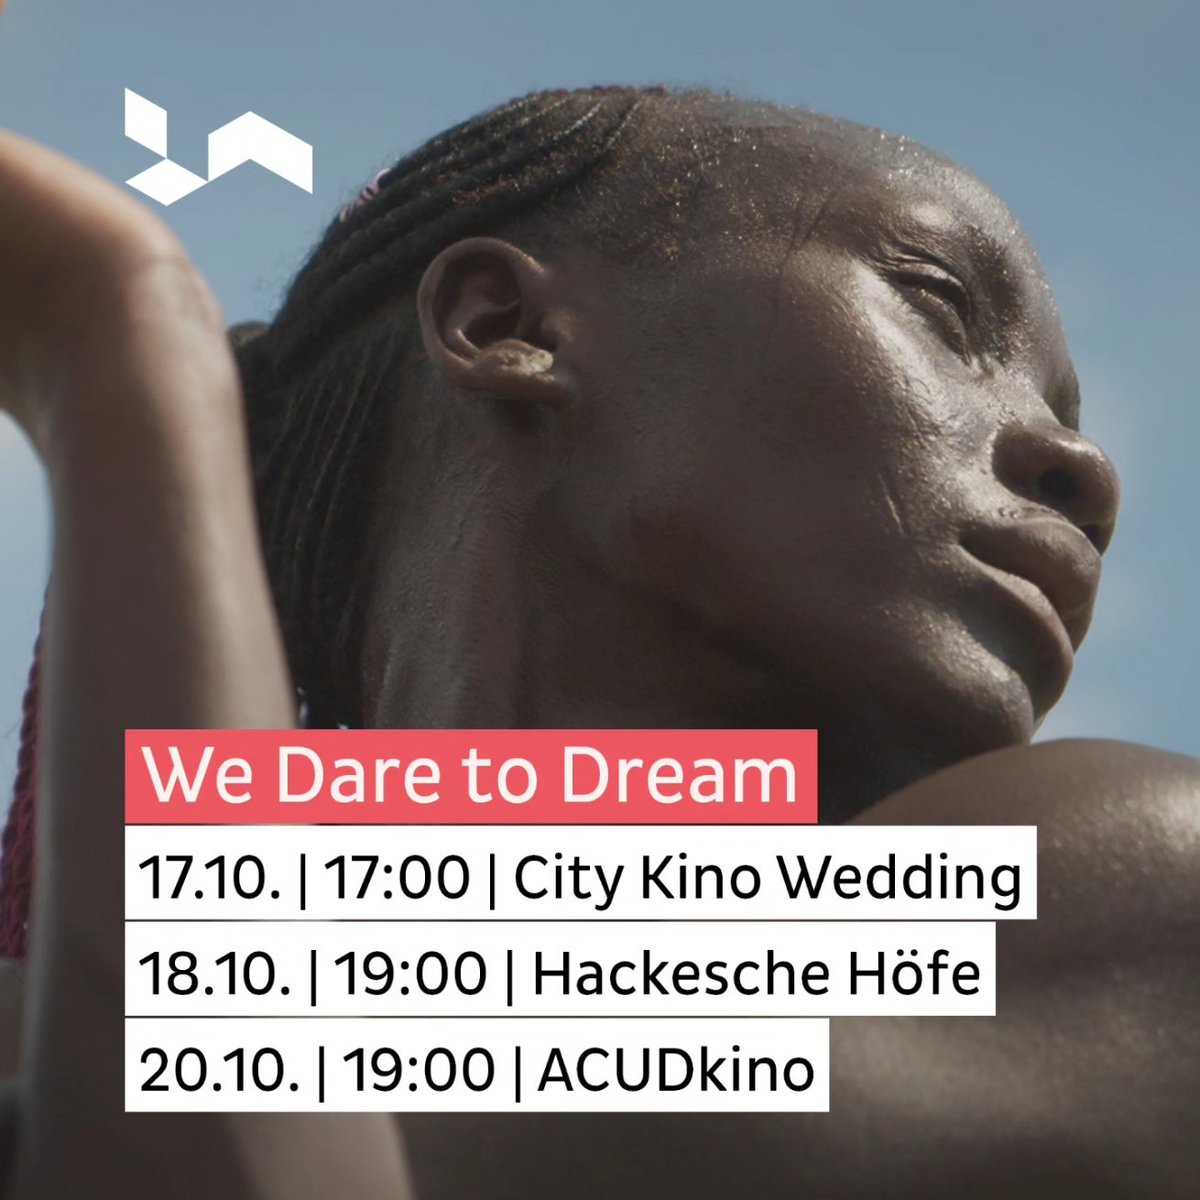 Experience the transformative power of sports and dreams in 'We Dare to Dream' & 'We Have a Dream'. Two films. Two inspiring journeys. Tickets available now! #DareToDream #WeHaveADream #FilmFestival